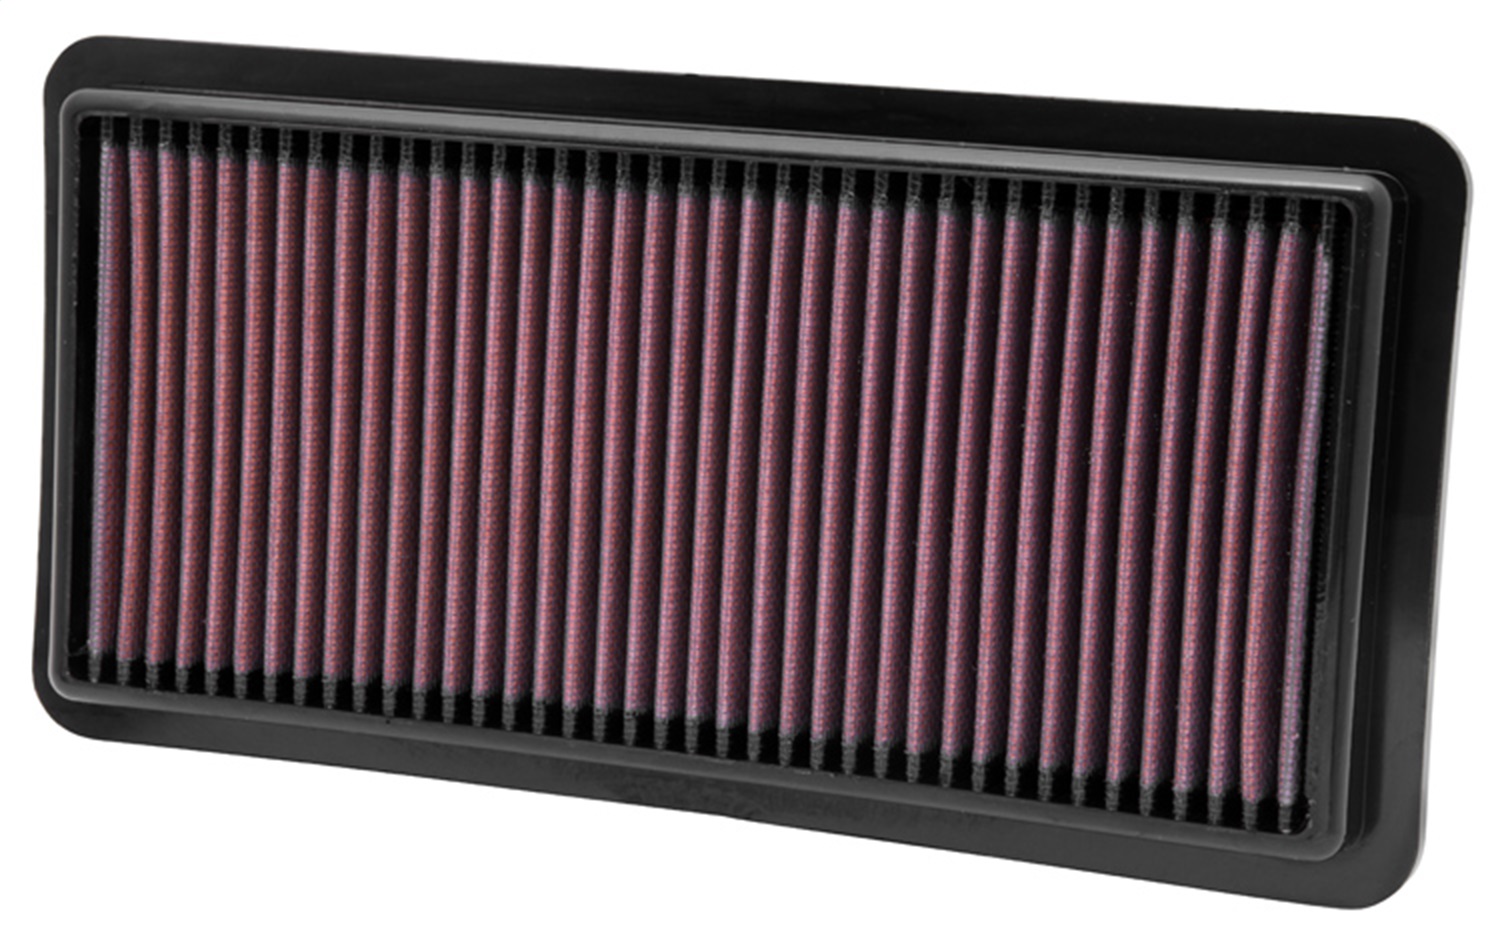 K&N Filters K&N Filters 33-2463 Air Filter Fits 10-13 SX4 SX4 Crossover